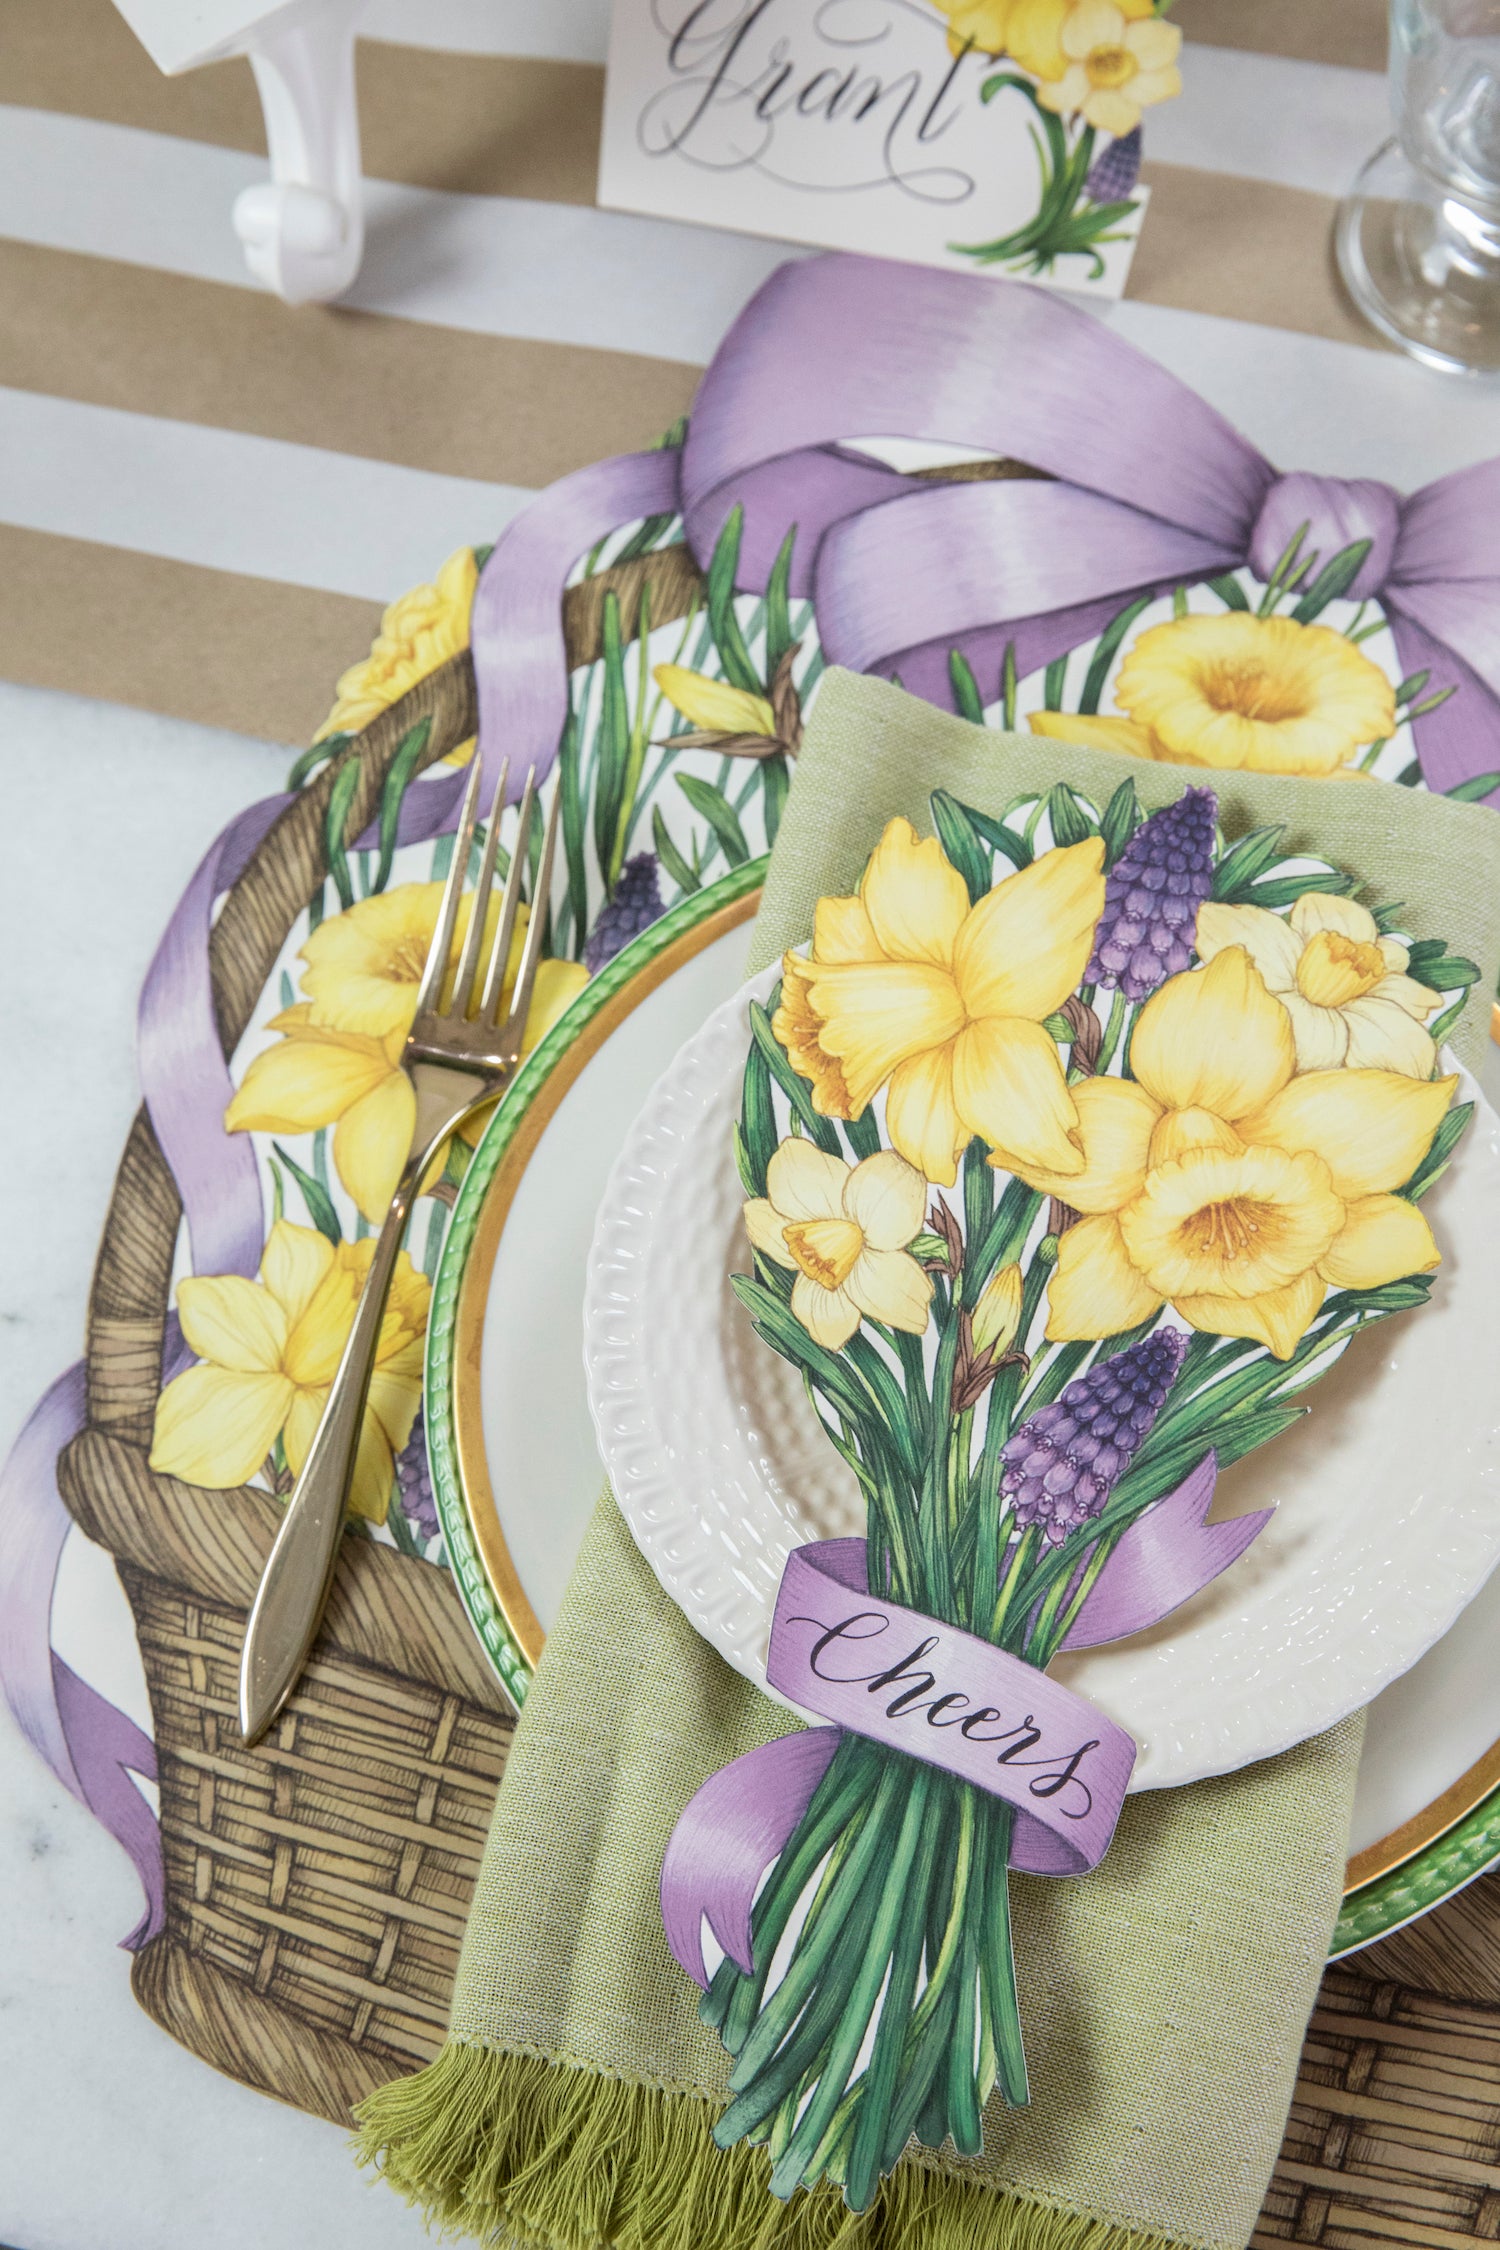 The Die-cut Daffodil Basket Placemat under an elegant Easter place setting.